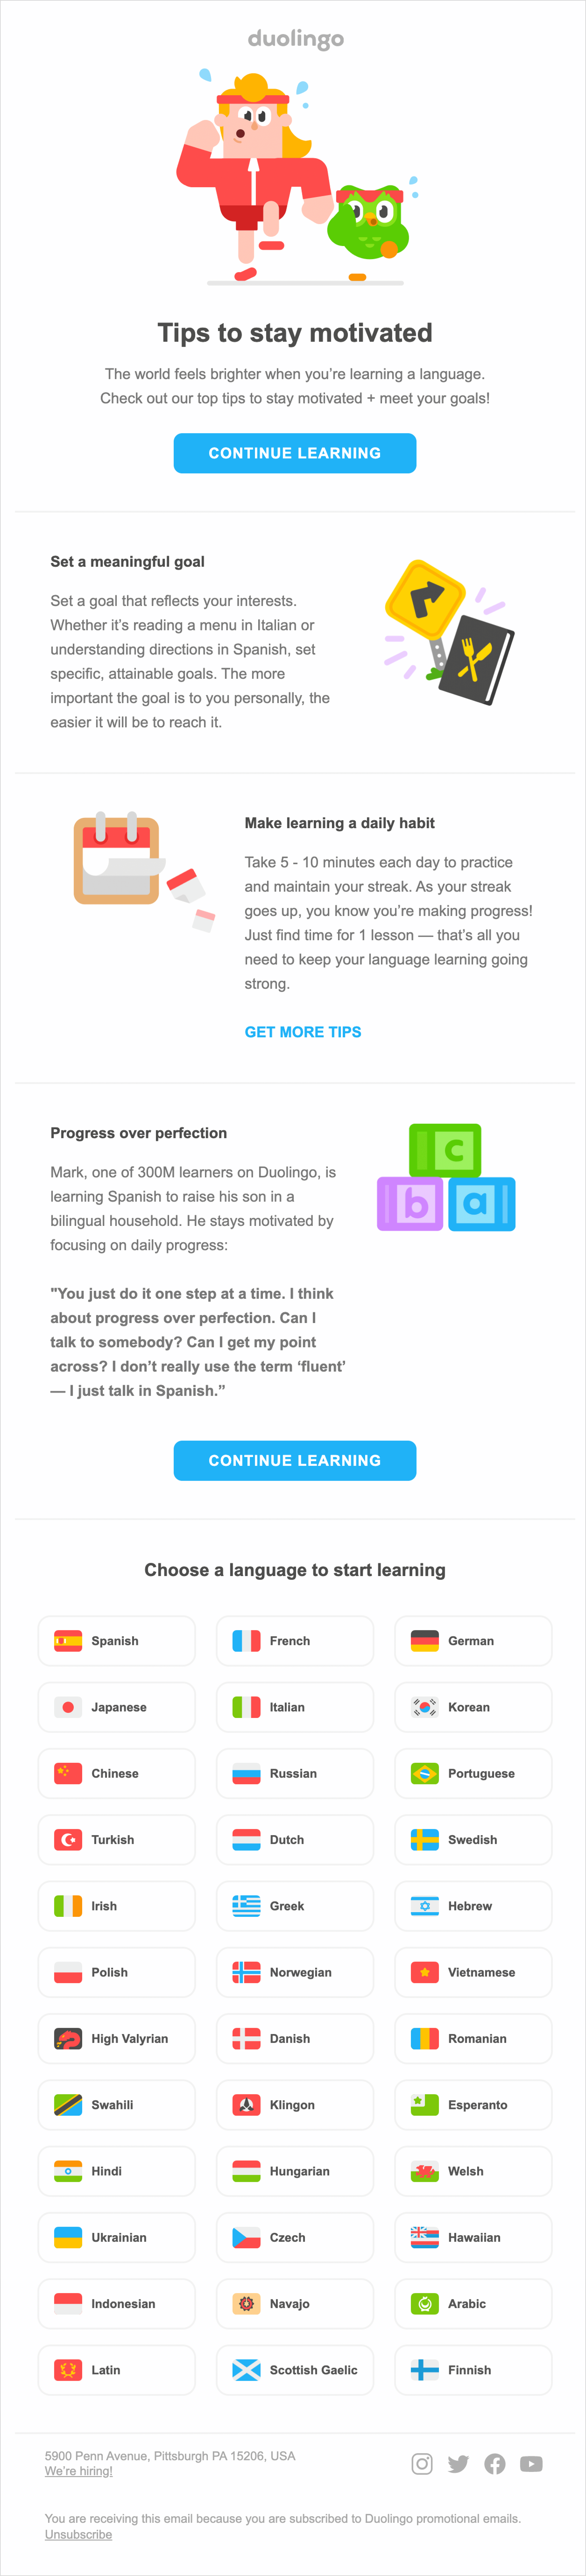 Example of email marketing campaign idea by Duolingo